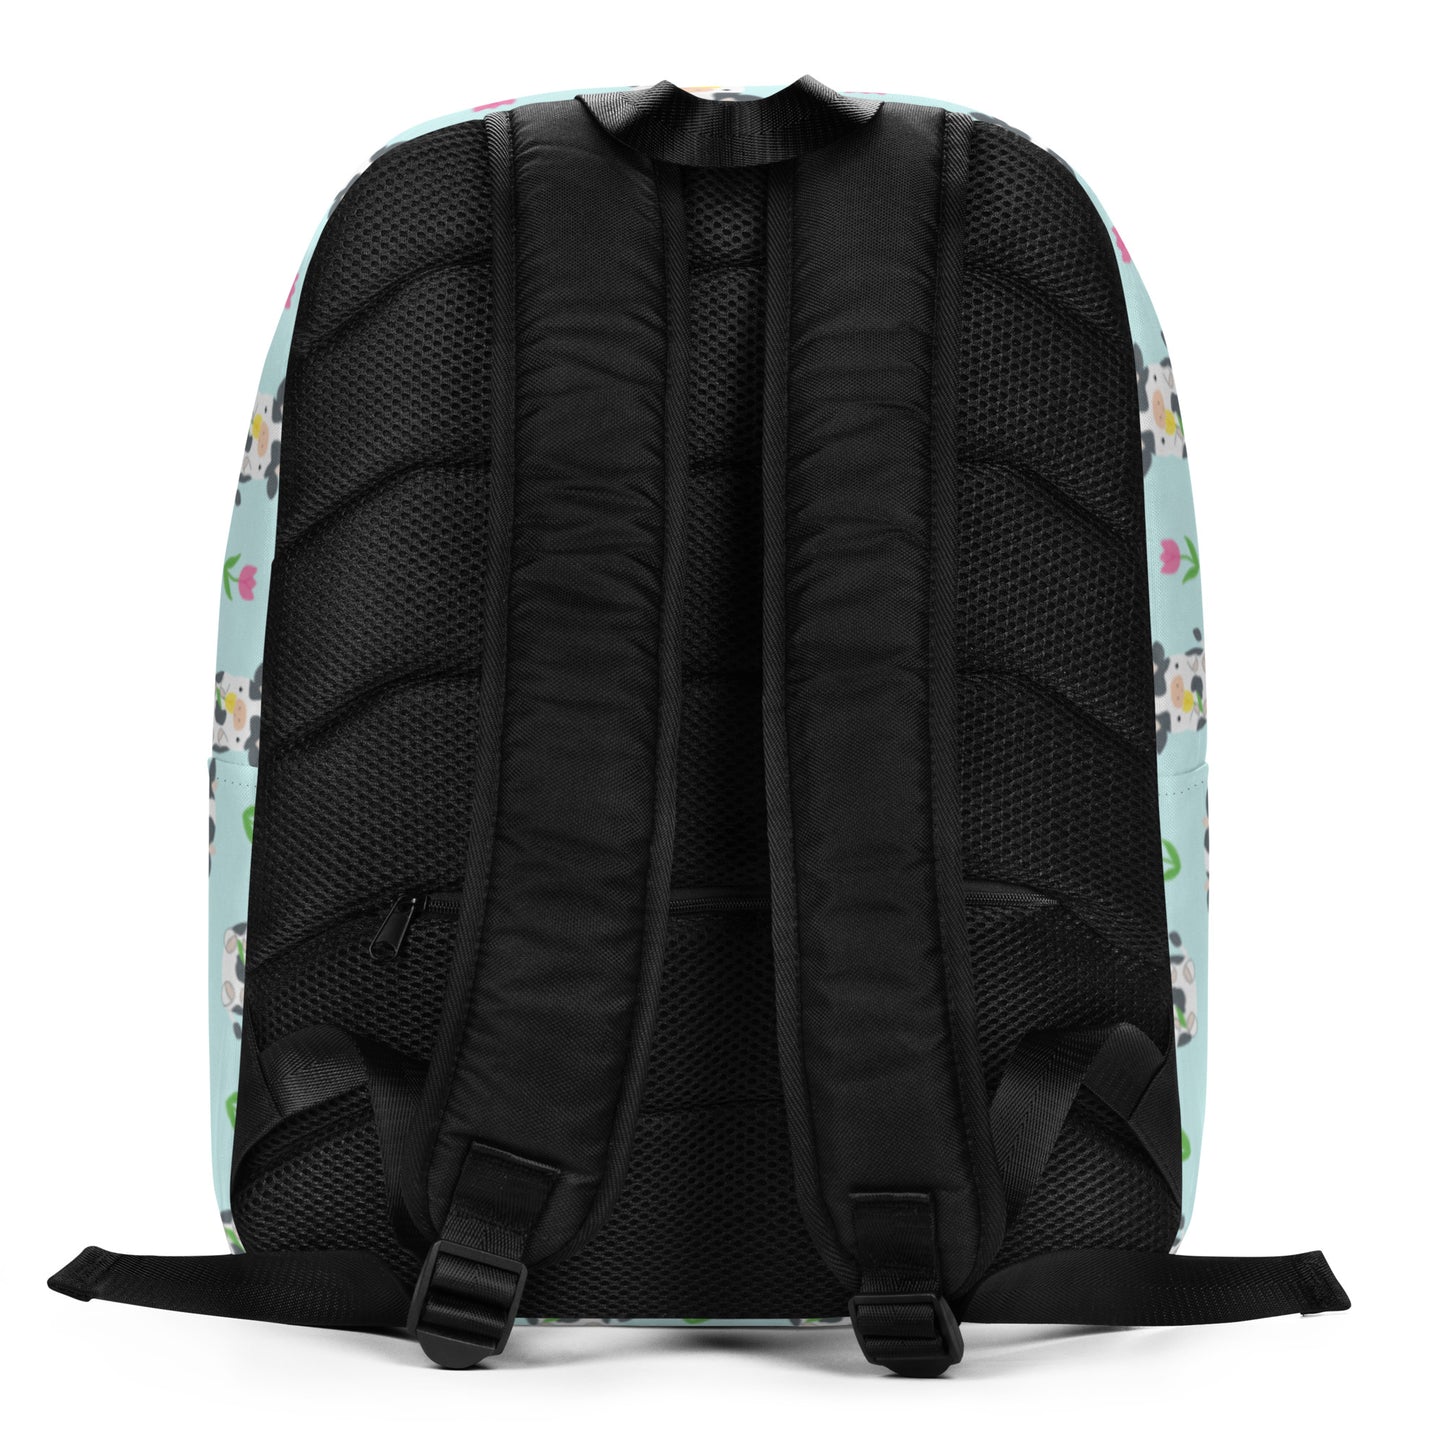 Tulip Cows Minimalist Backpack - Cyan by Wild Whimsy Woolies